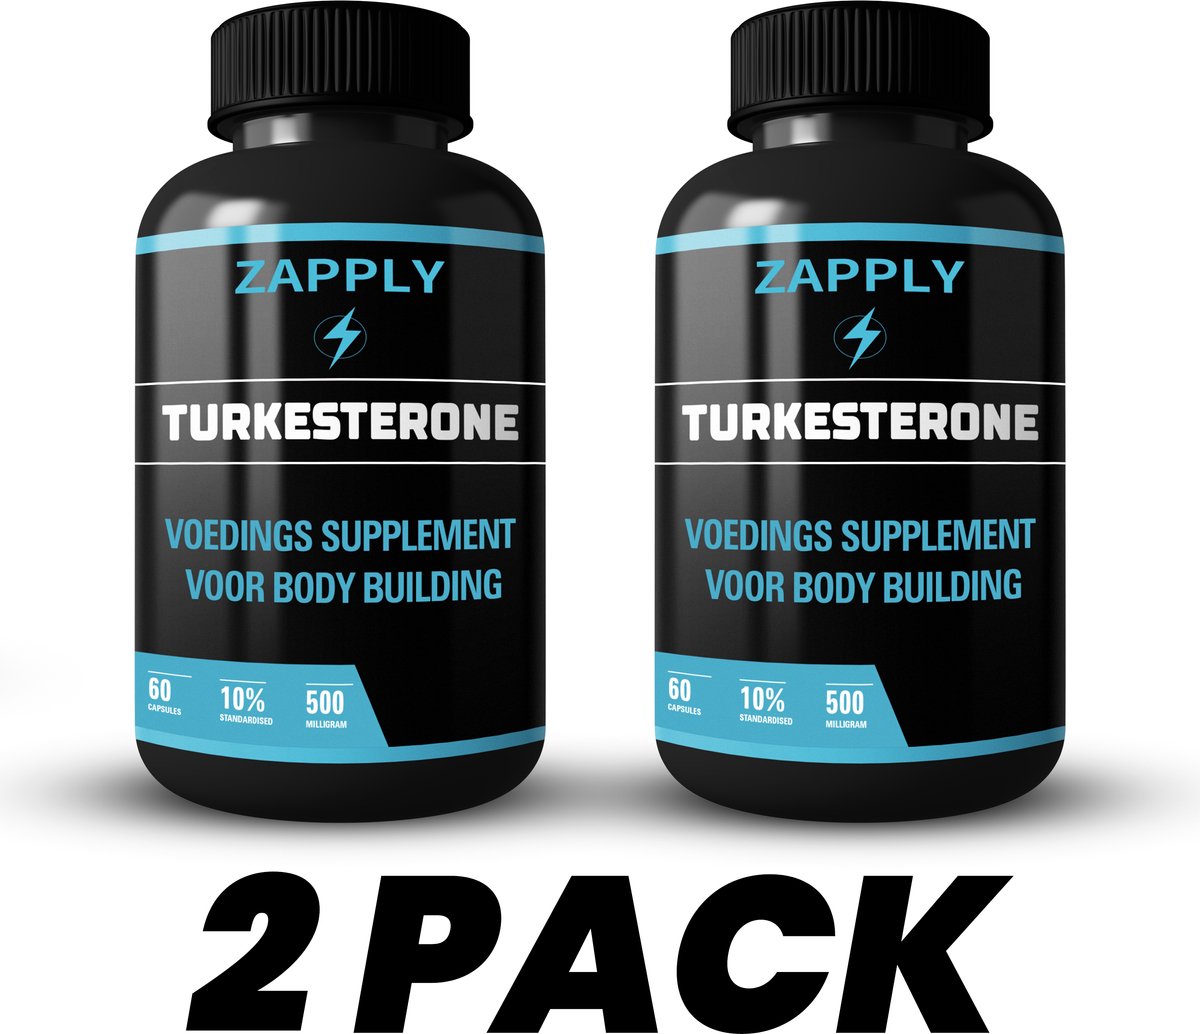 Zapply - Turkesterone 500 MG (Puur)- 2 PACK - TURK PRO 120 capsules - Testosteron booster - Muscle builder - Afslankpillen - Incl. E-book